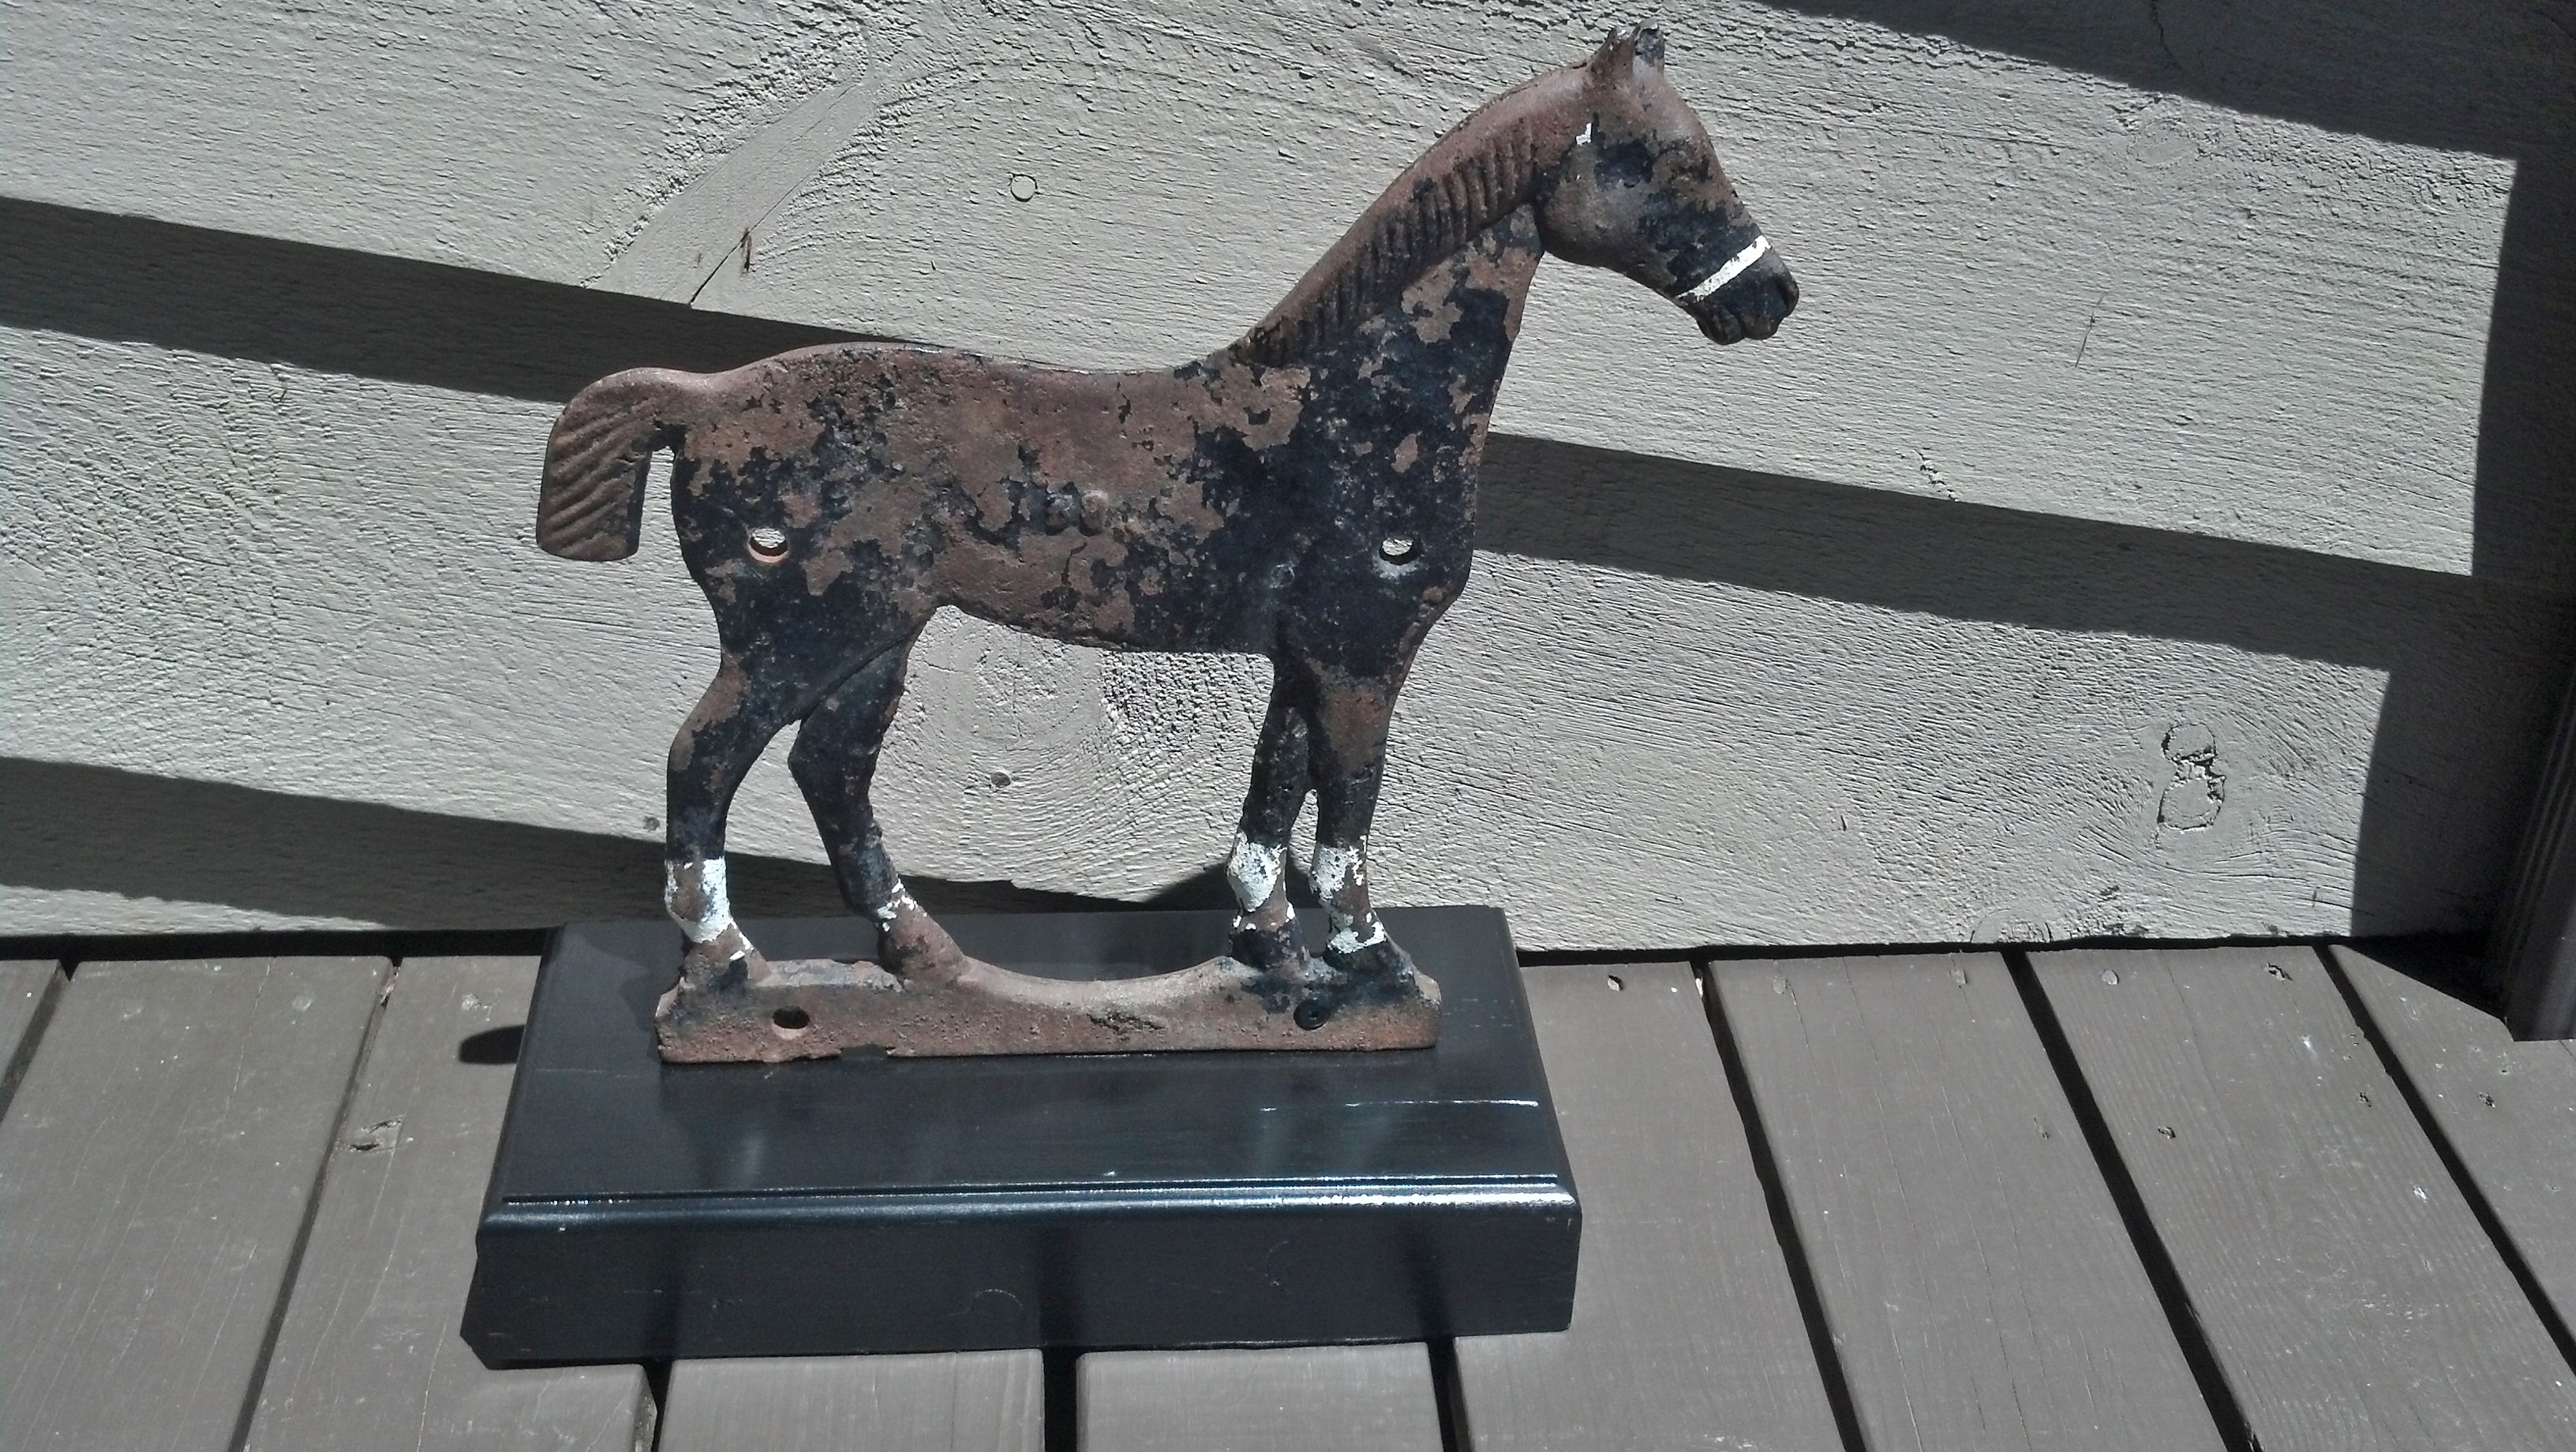 SHORT TAIL HORSE IN OLD PAINT